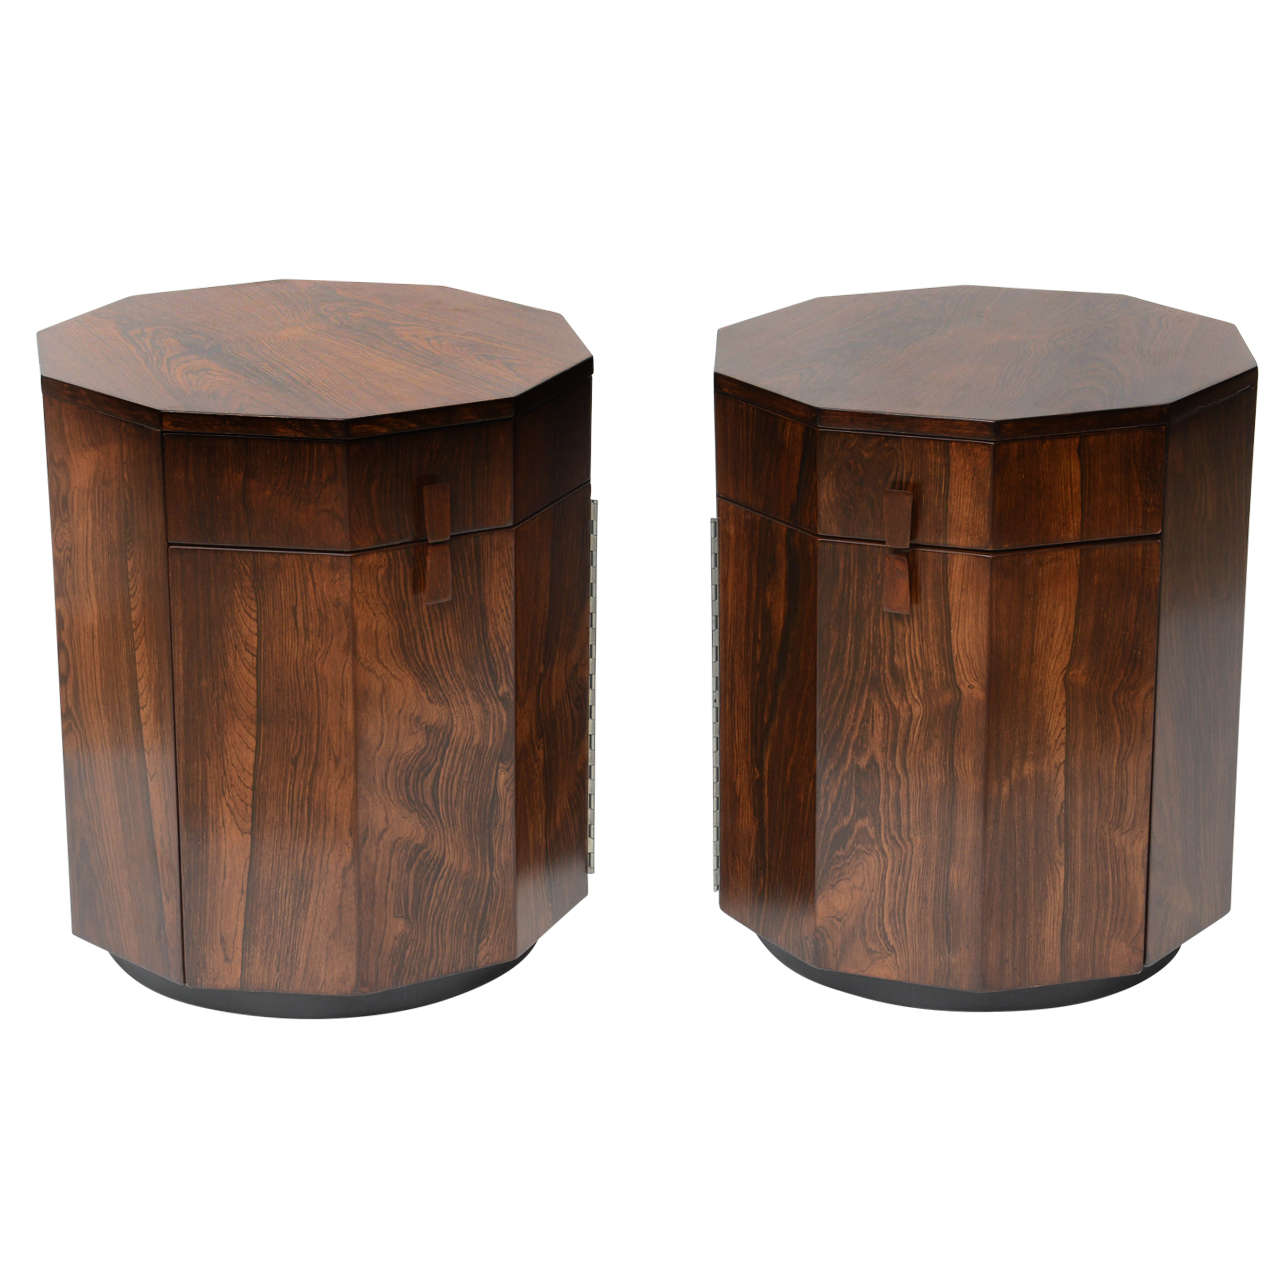 Pair of Harvey Probber Rosewood End Tables with Storage Space